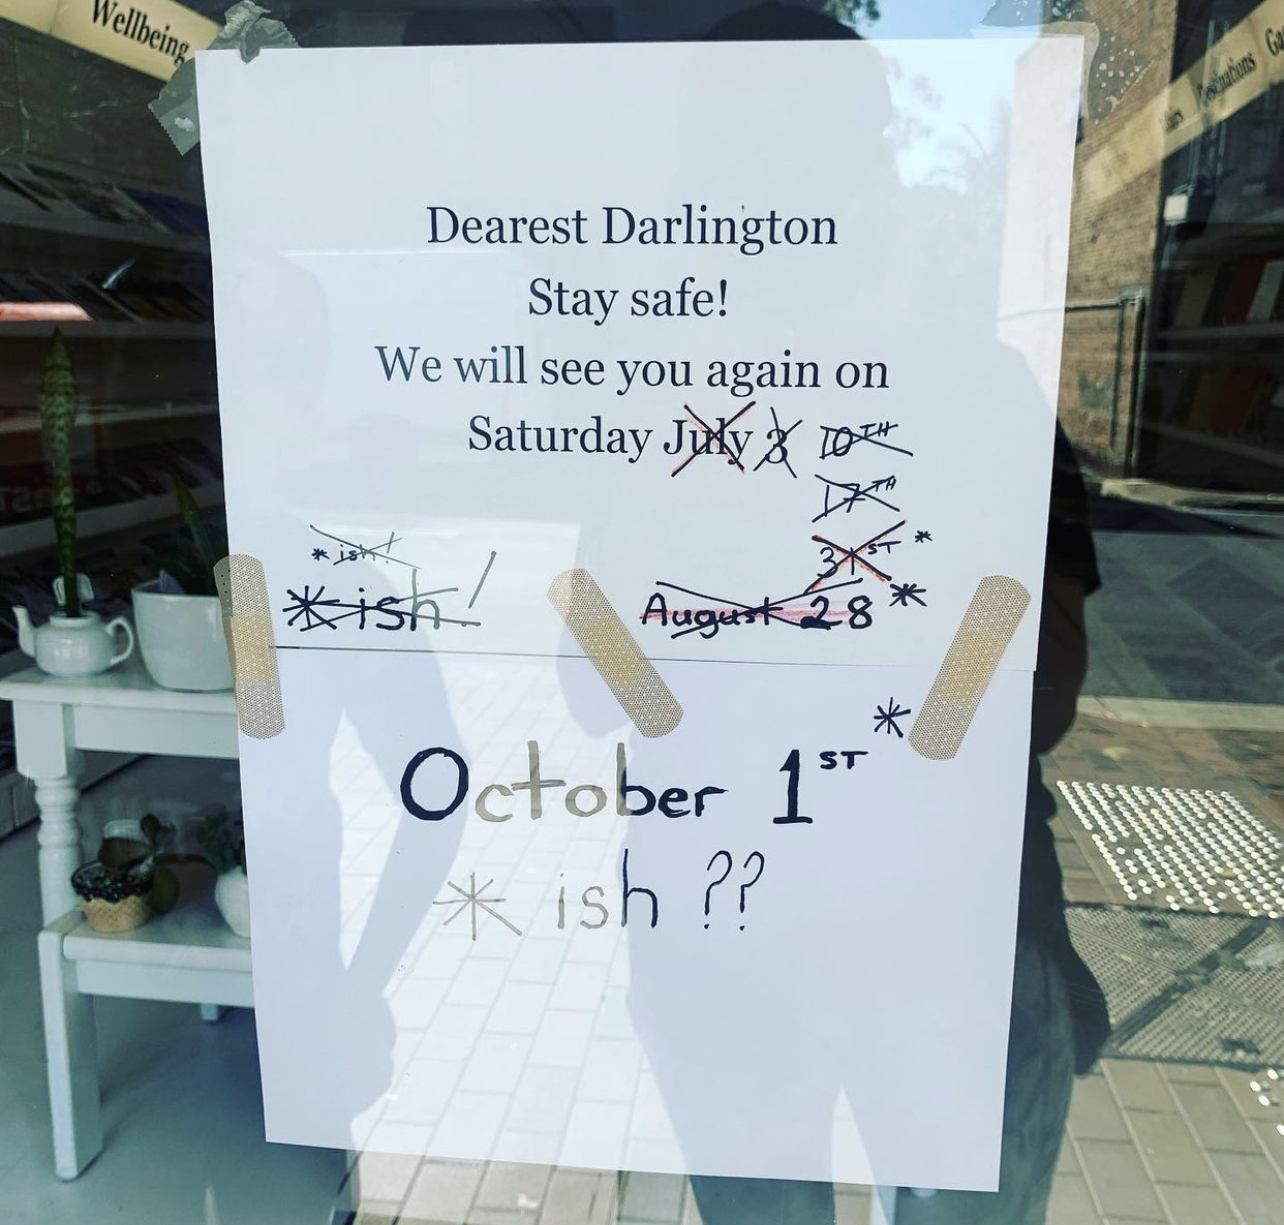 A white paper sign with black text that reads: Dearst Darlington, stay safe! We will see you again on Saturday - followed by 5 dates crossed out and finally the words 'October 1st ish'